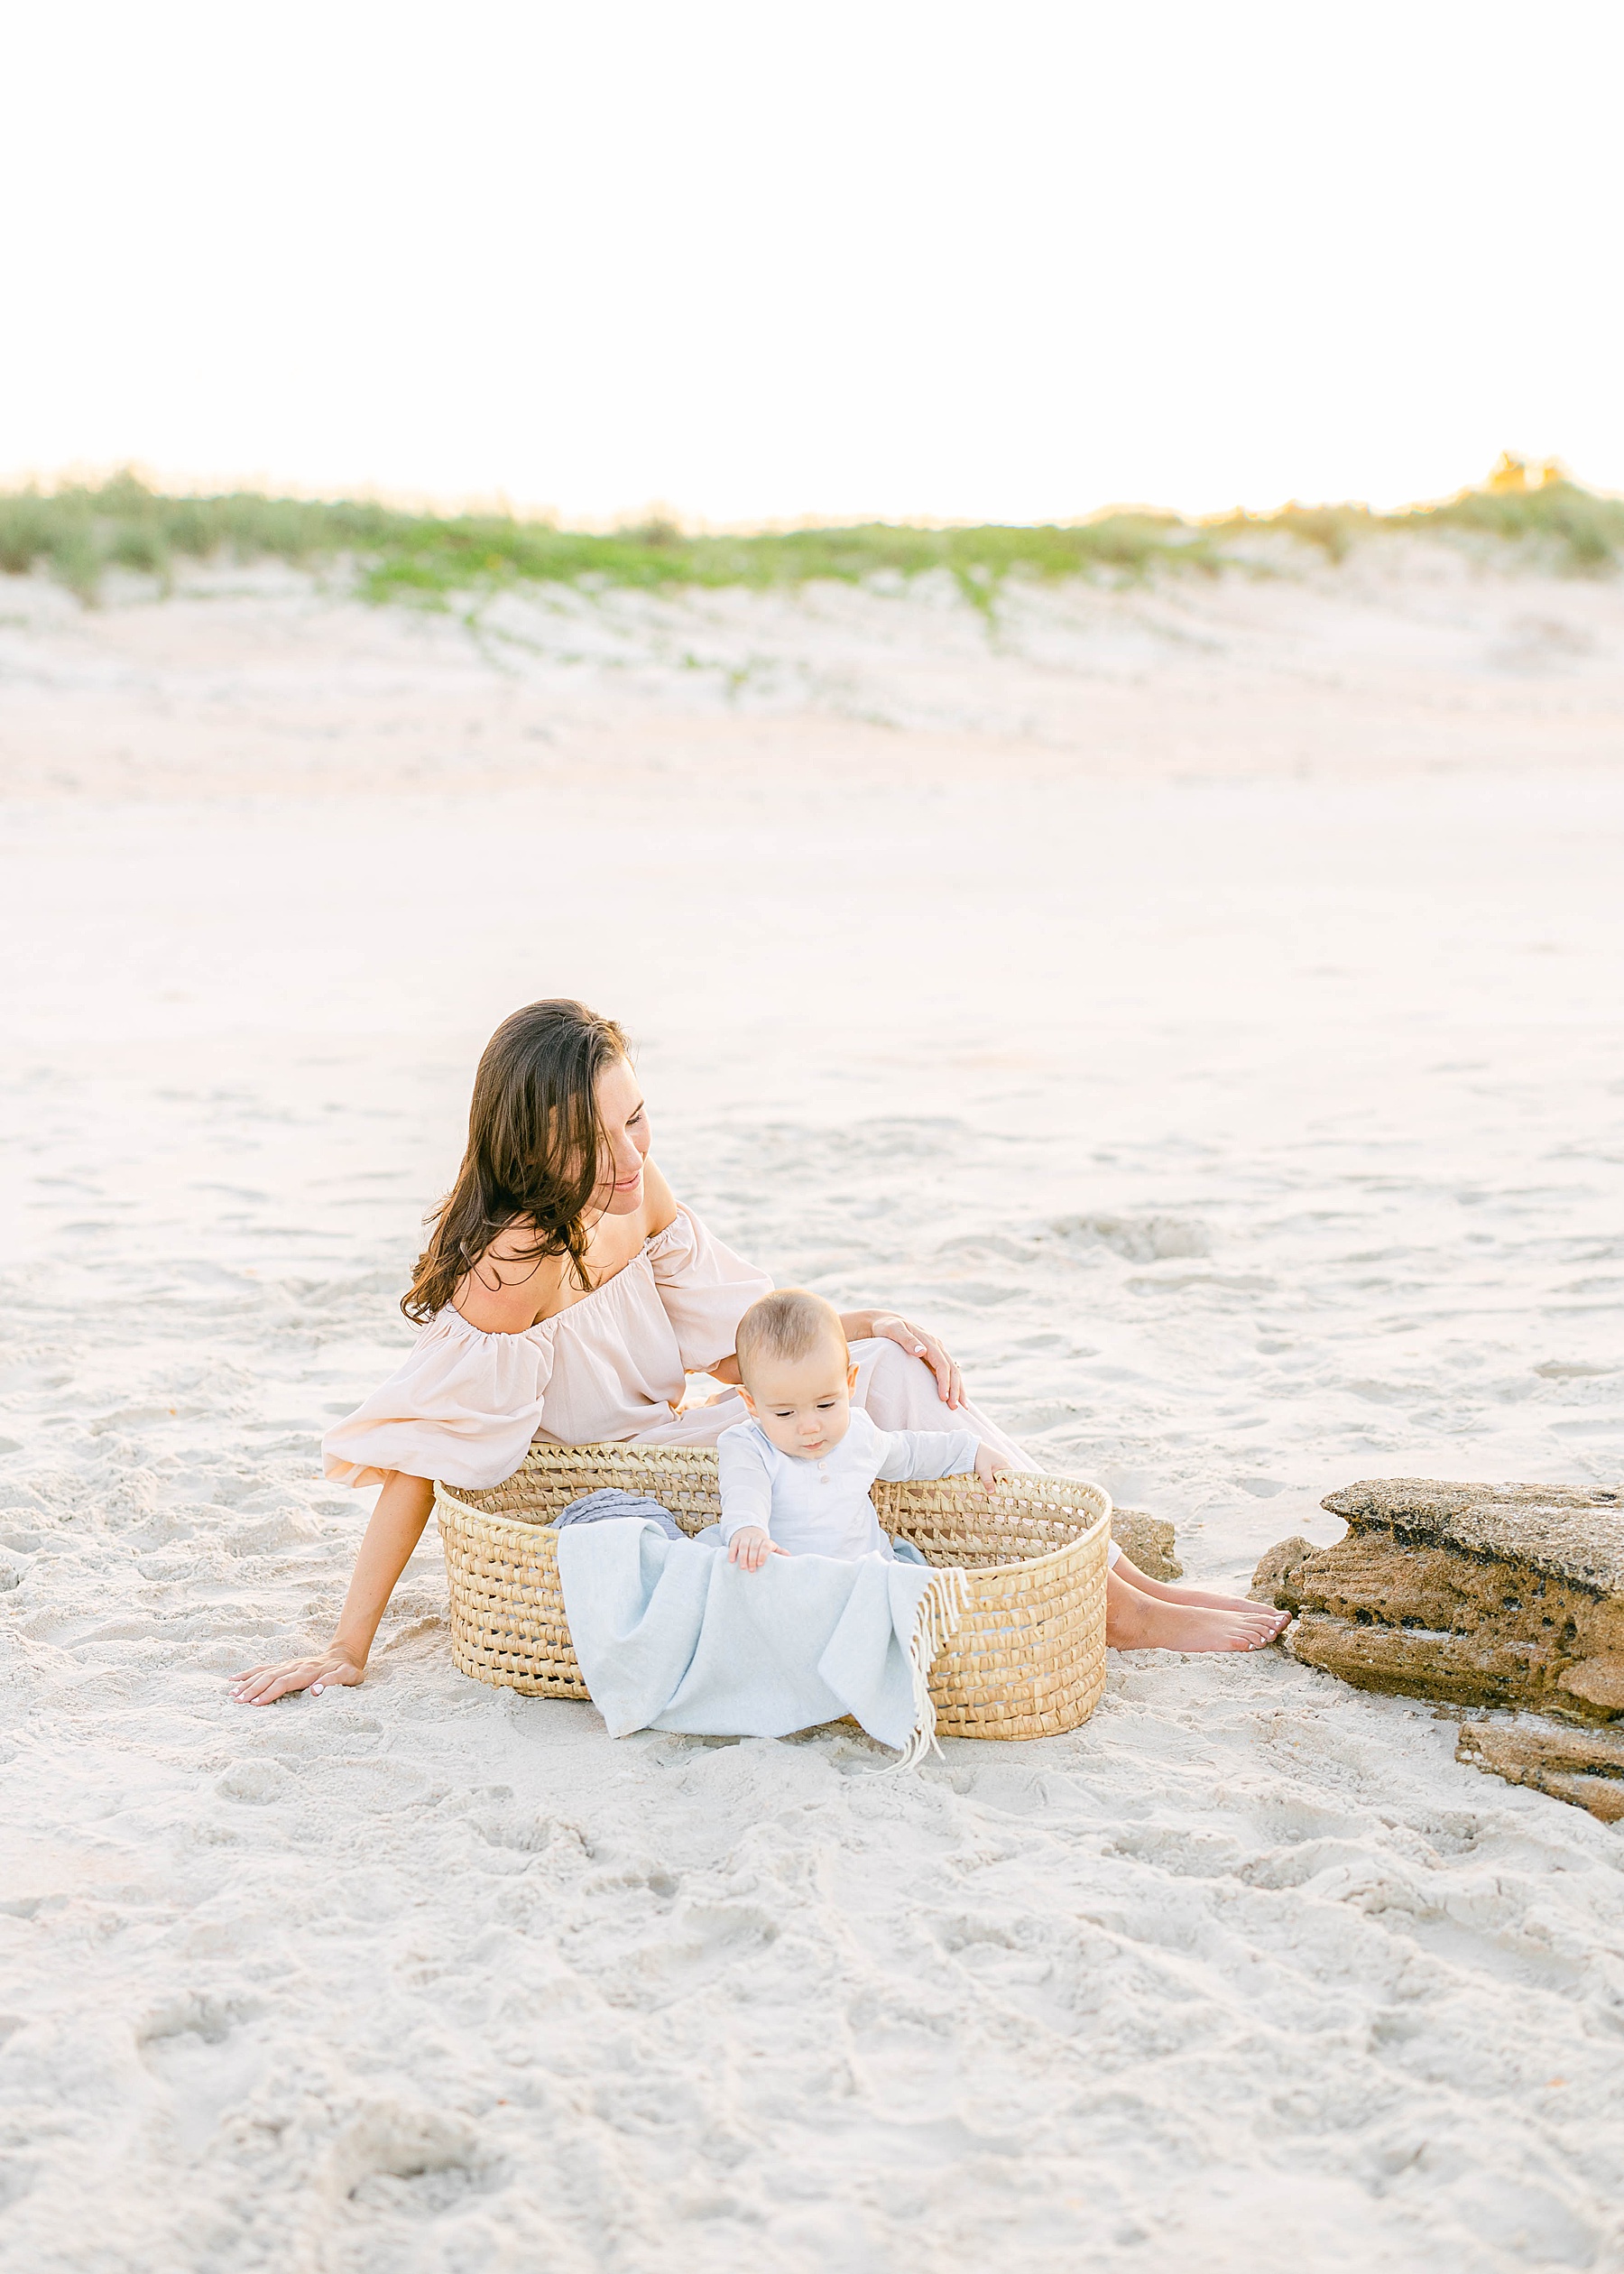 woman sitting on the beach with baby boy in basket